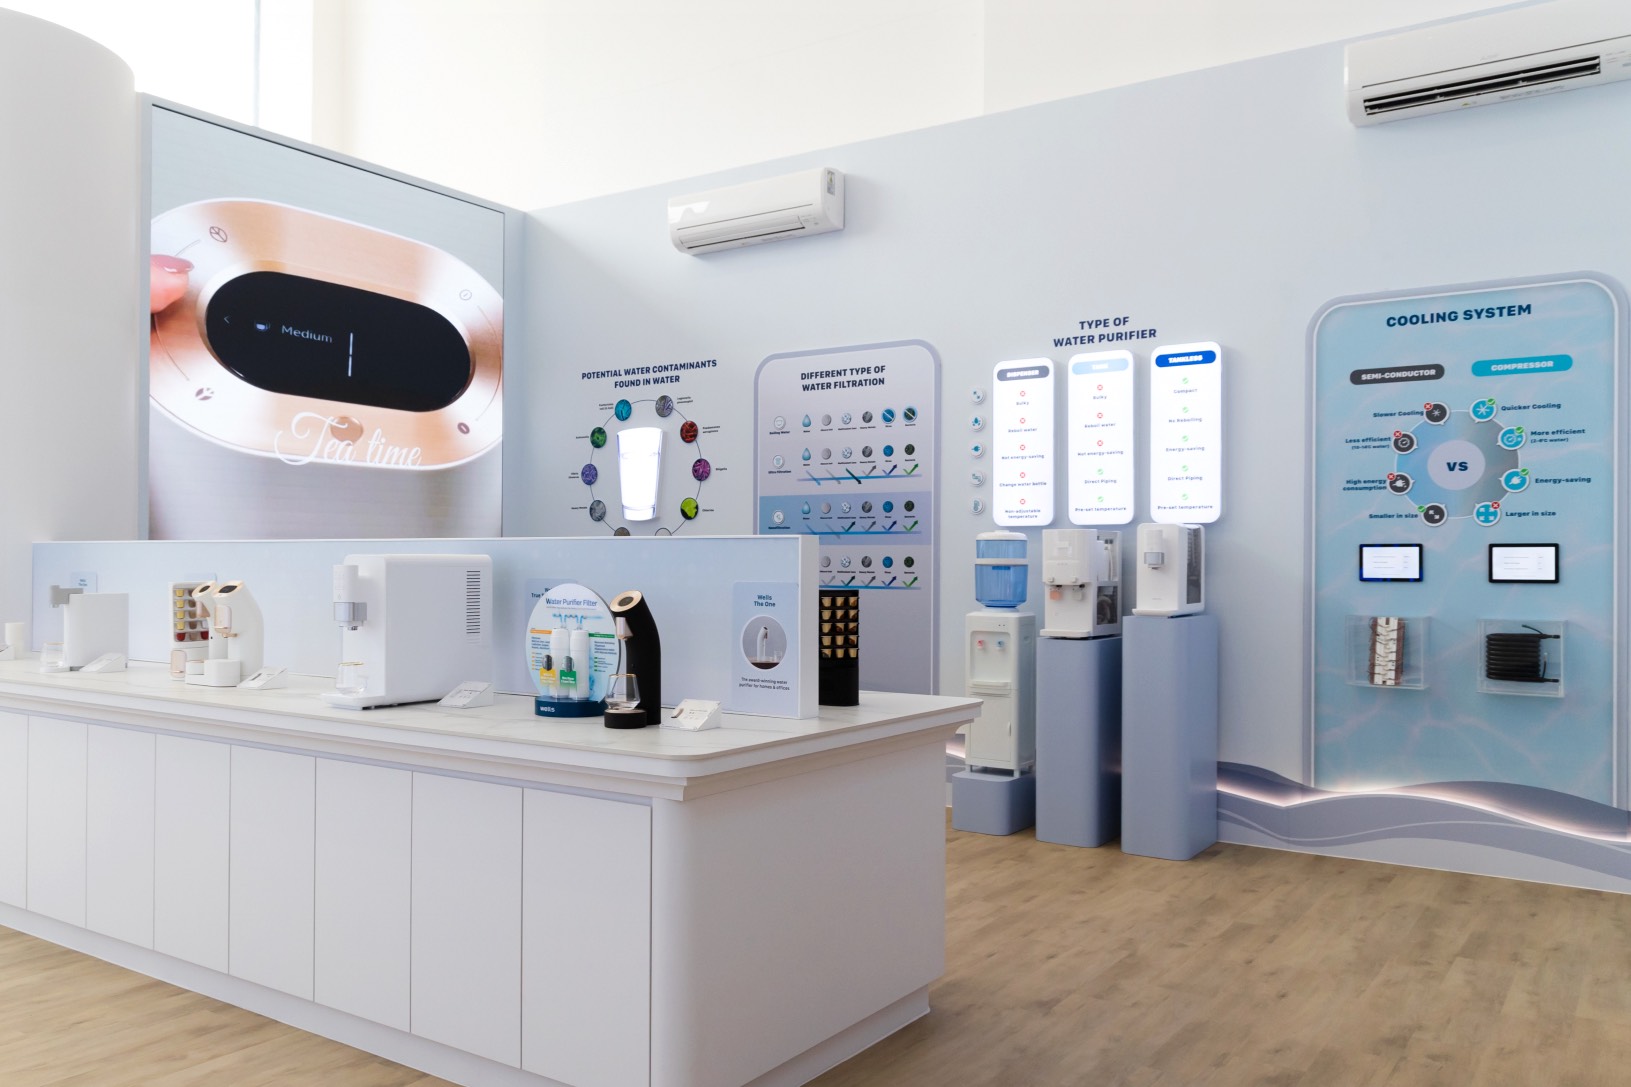 , Visit the new immersive Wells Experience Centre to discover award-winning water dispensers and appliances